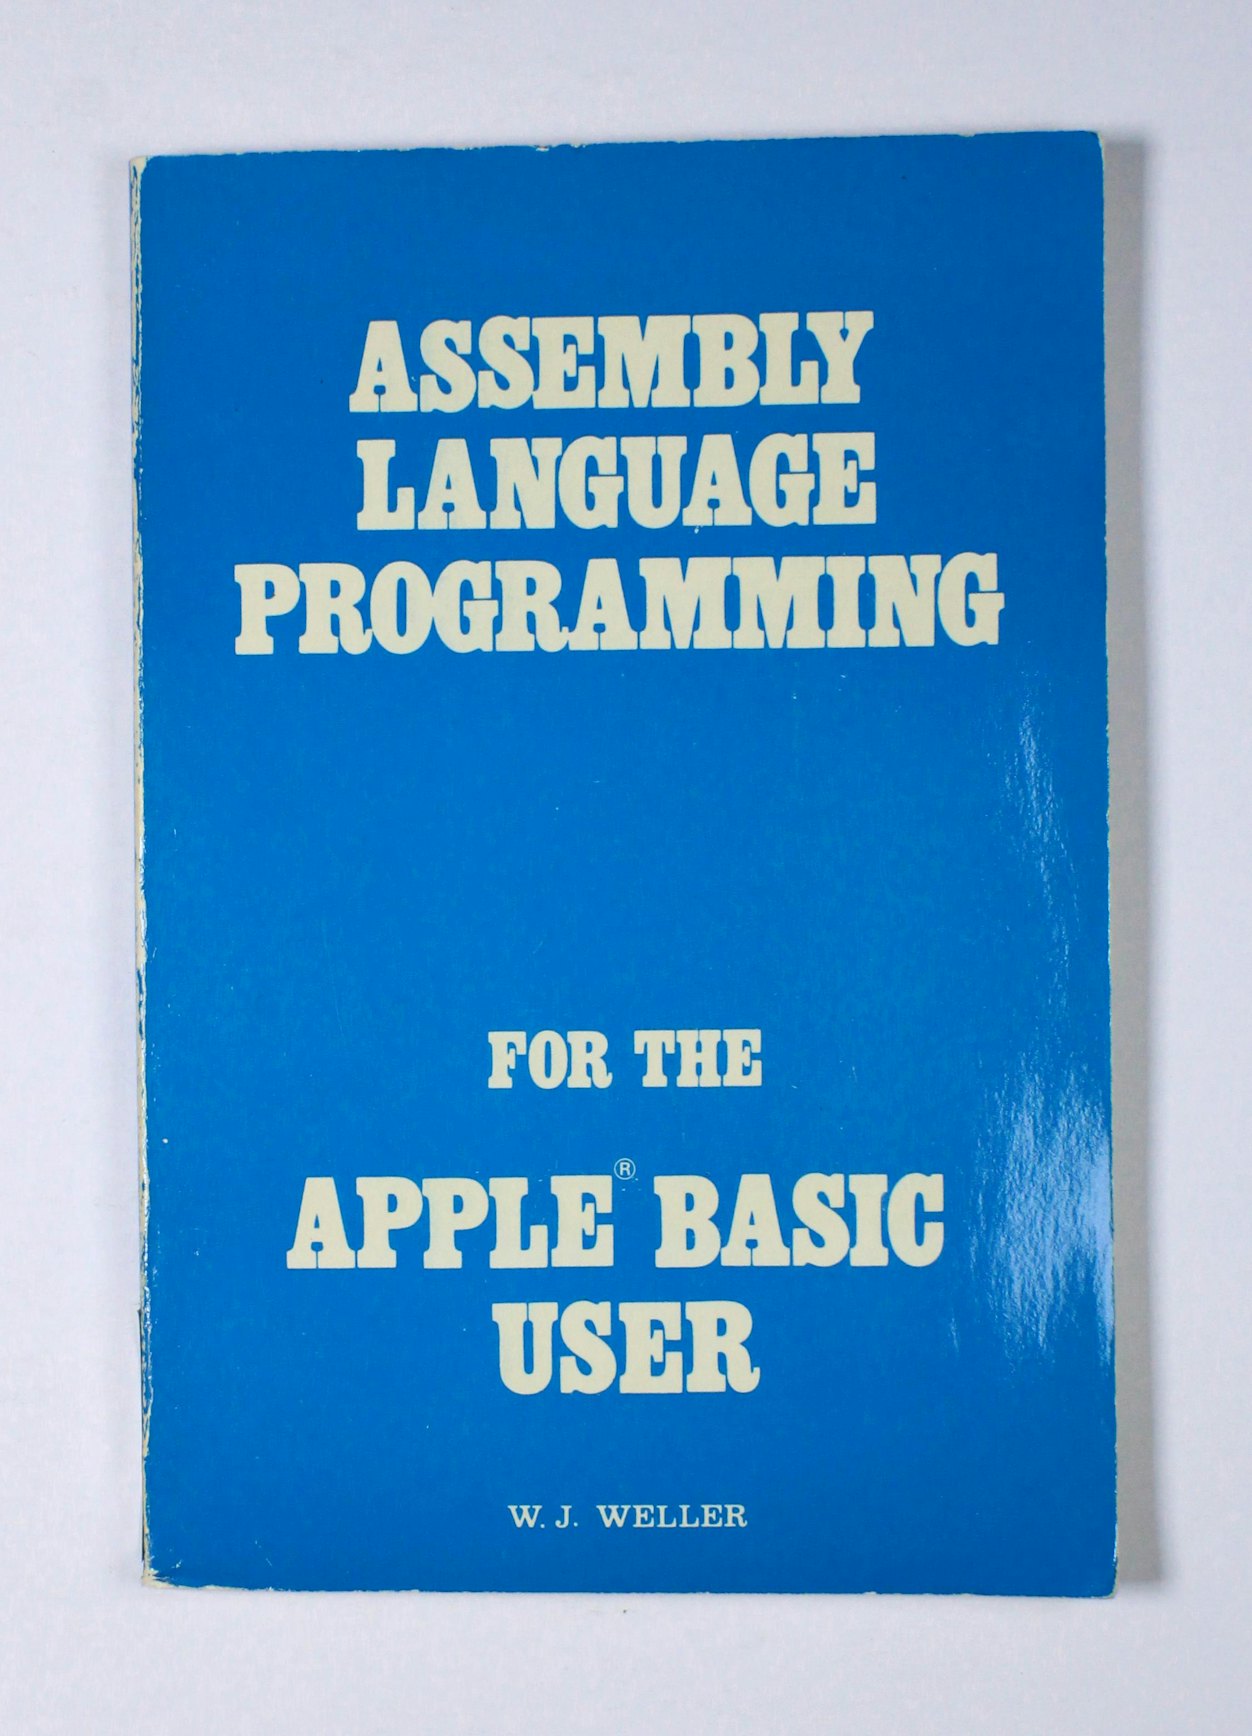 Assembly Language Programming for the Apple Basic User